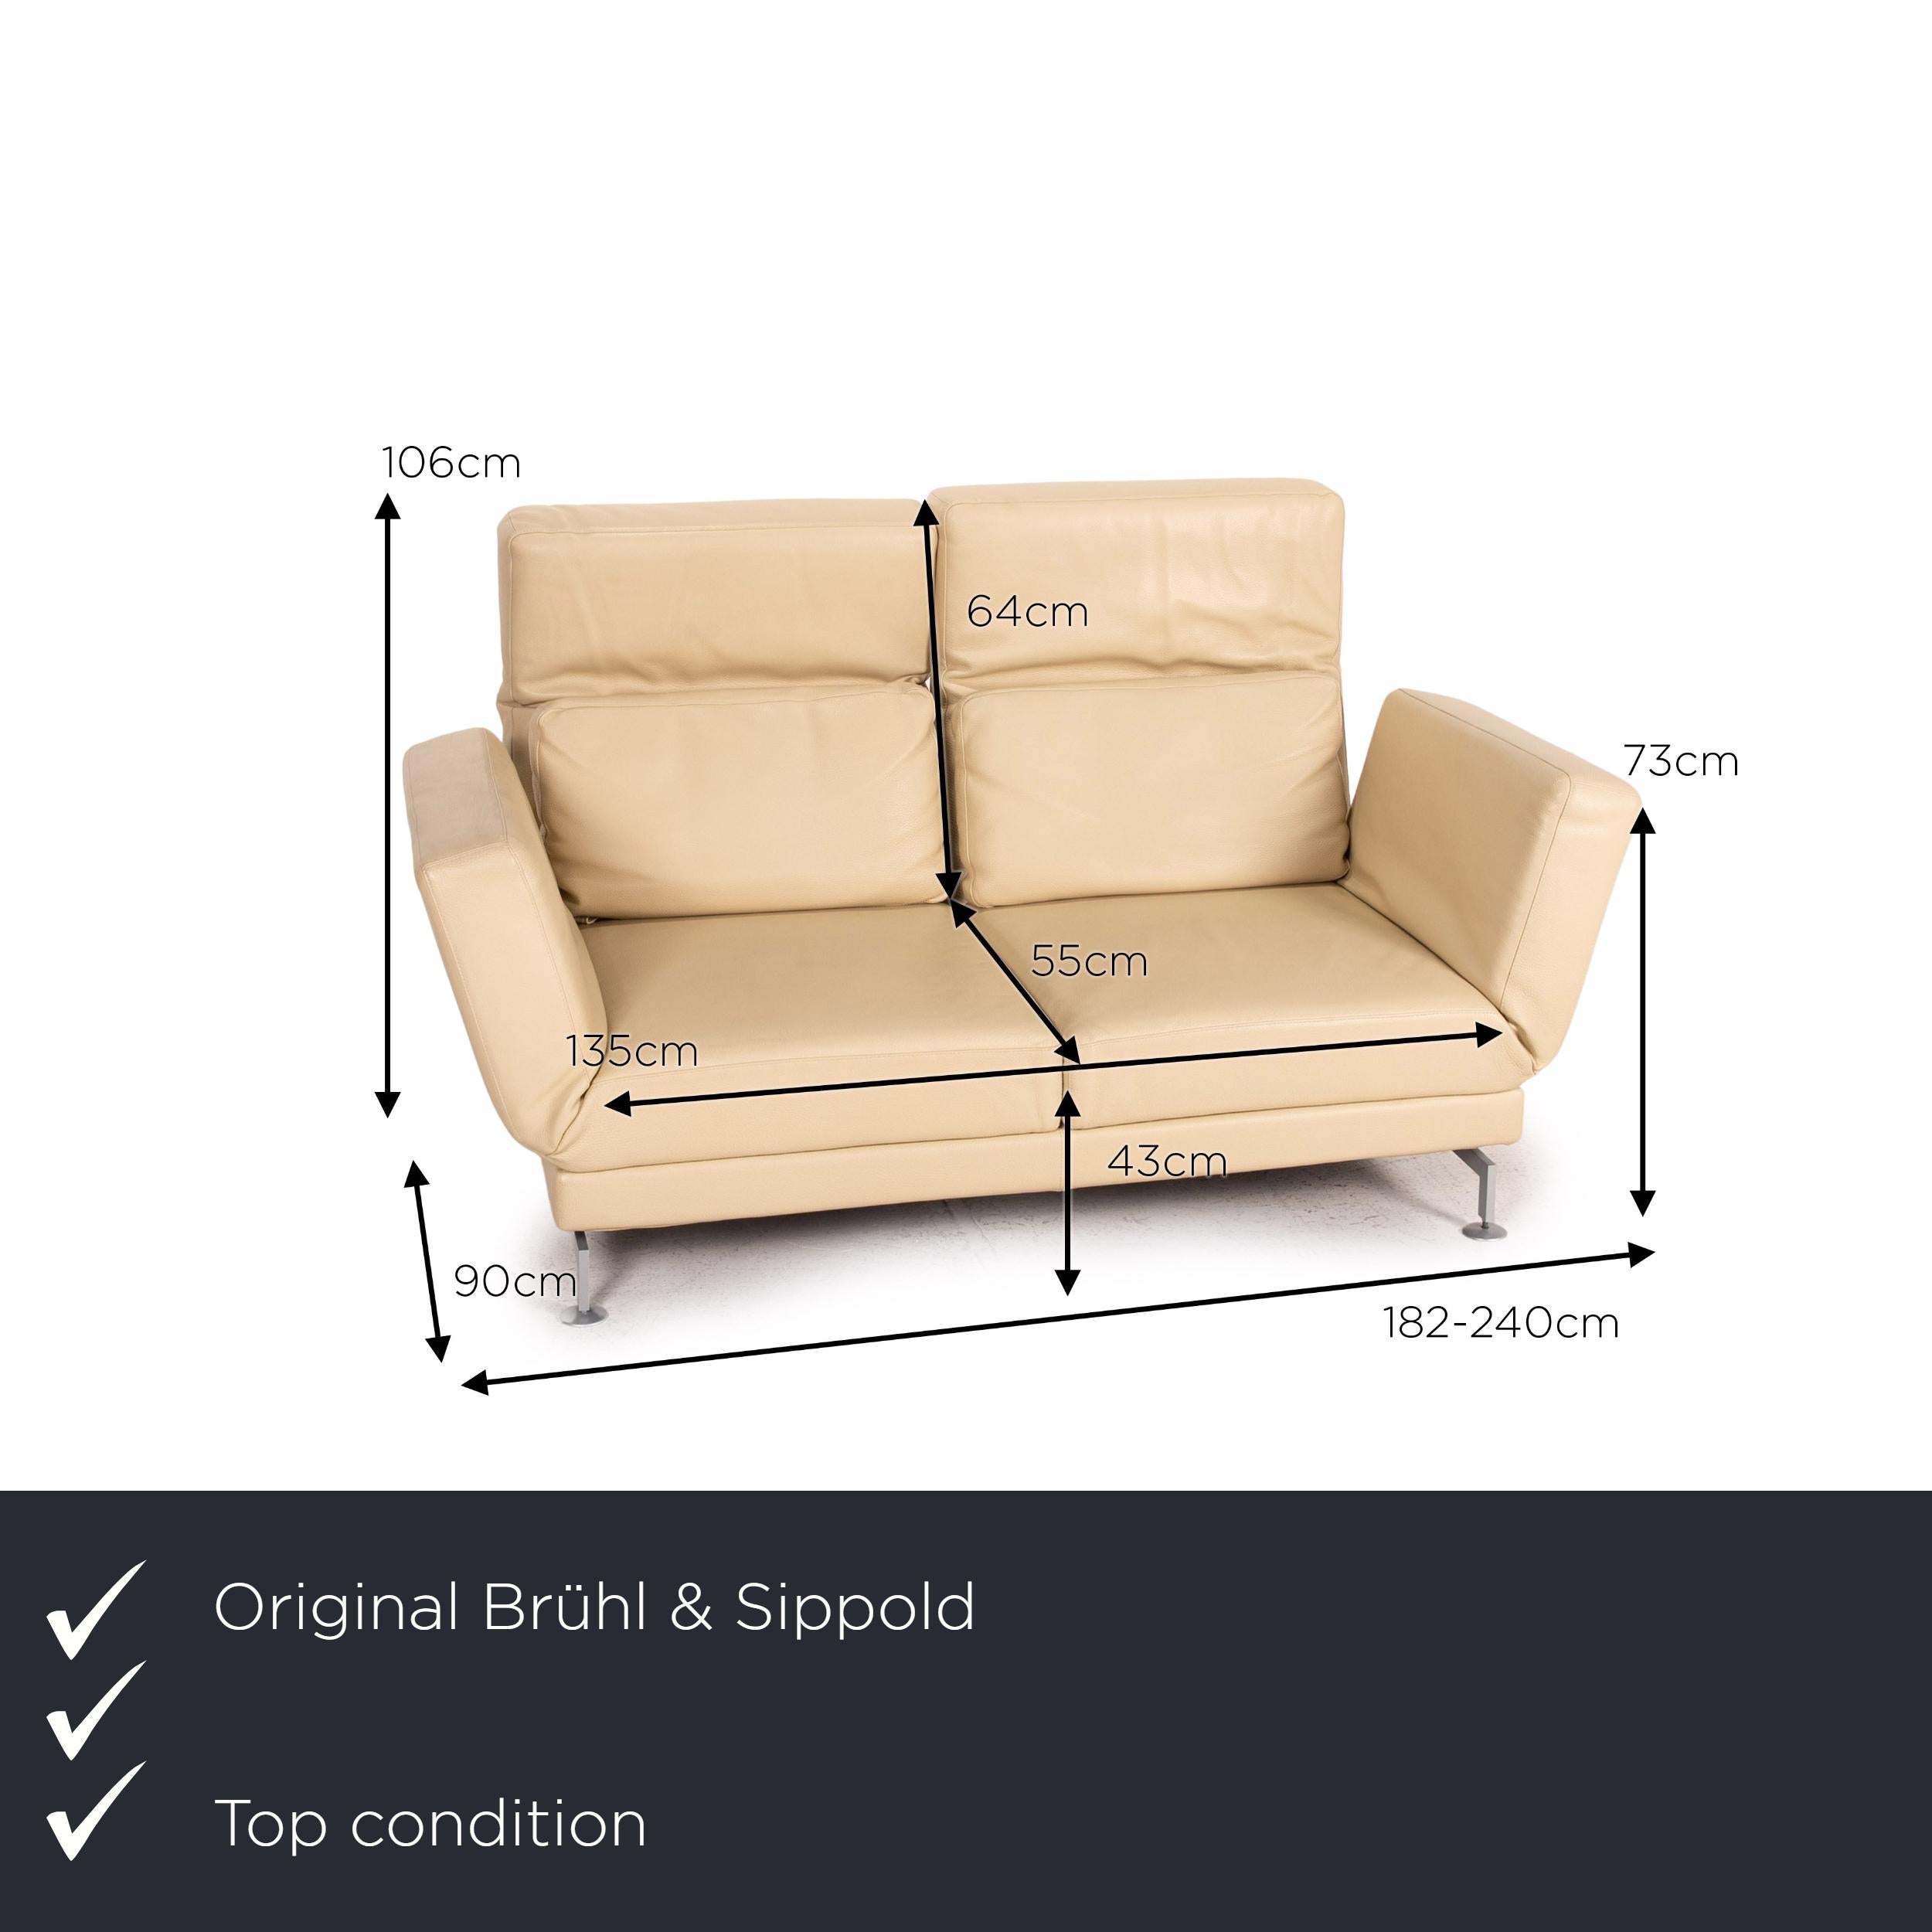 We present to you a Brühl & Sippold Moule leather sofa cream two-seater function relax function.
 

 Product measurements in centimeters:
 

Depth: 90
Width: 182
Height: 106
Seat height: 43
Rest height: 73
Seat depth: 55
Seat width: